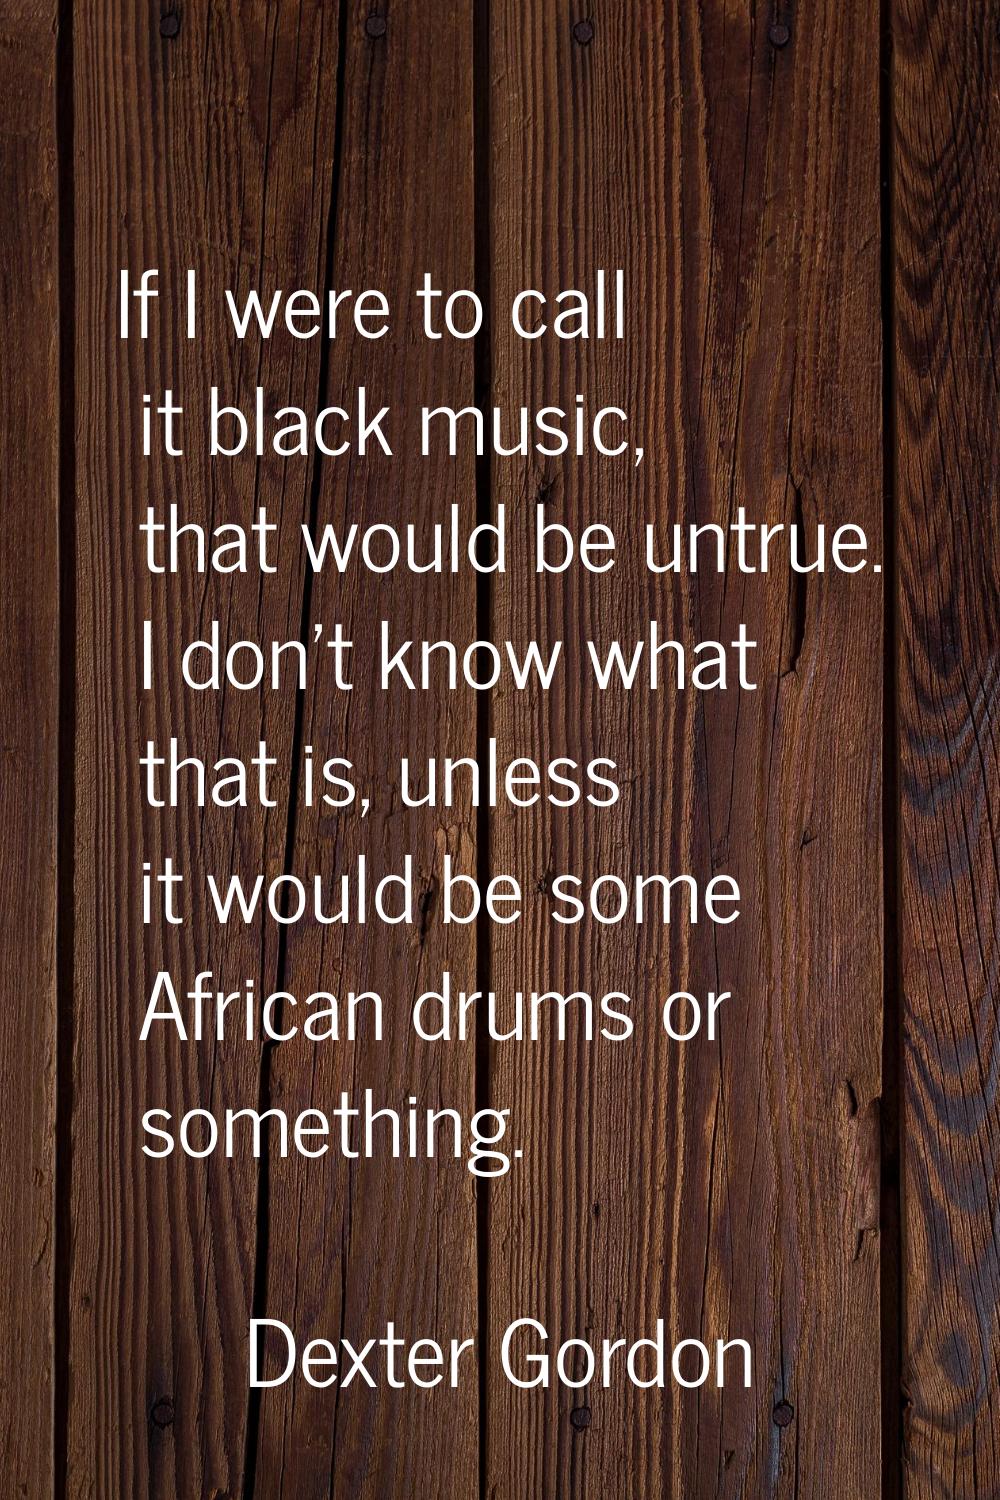 If I were to call it black music, that would be untrue. I don't know what that is, unless it would 